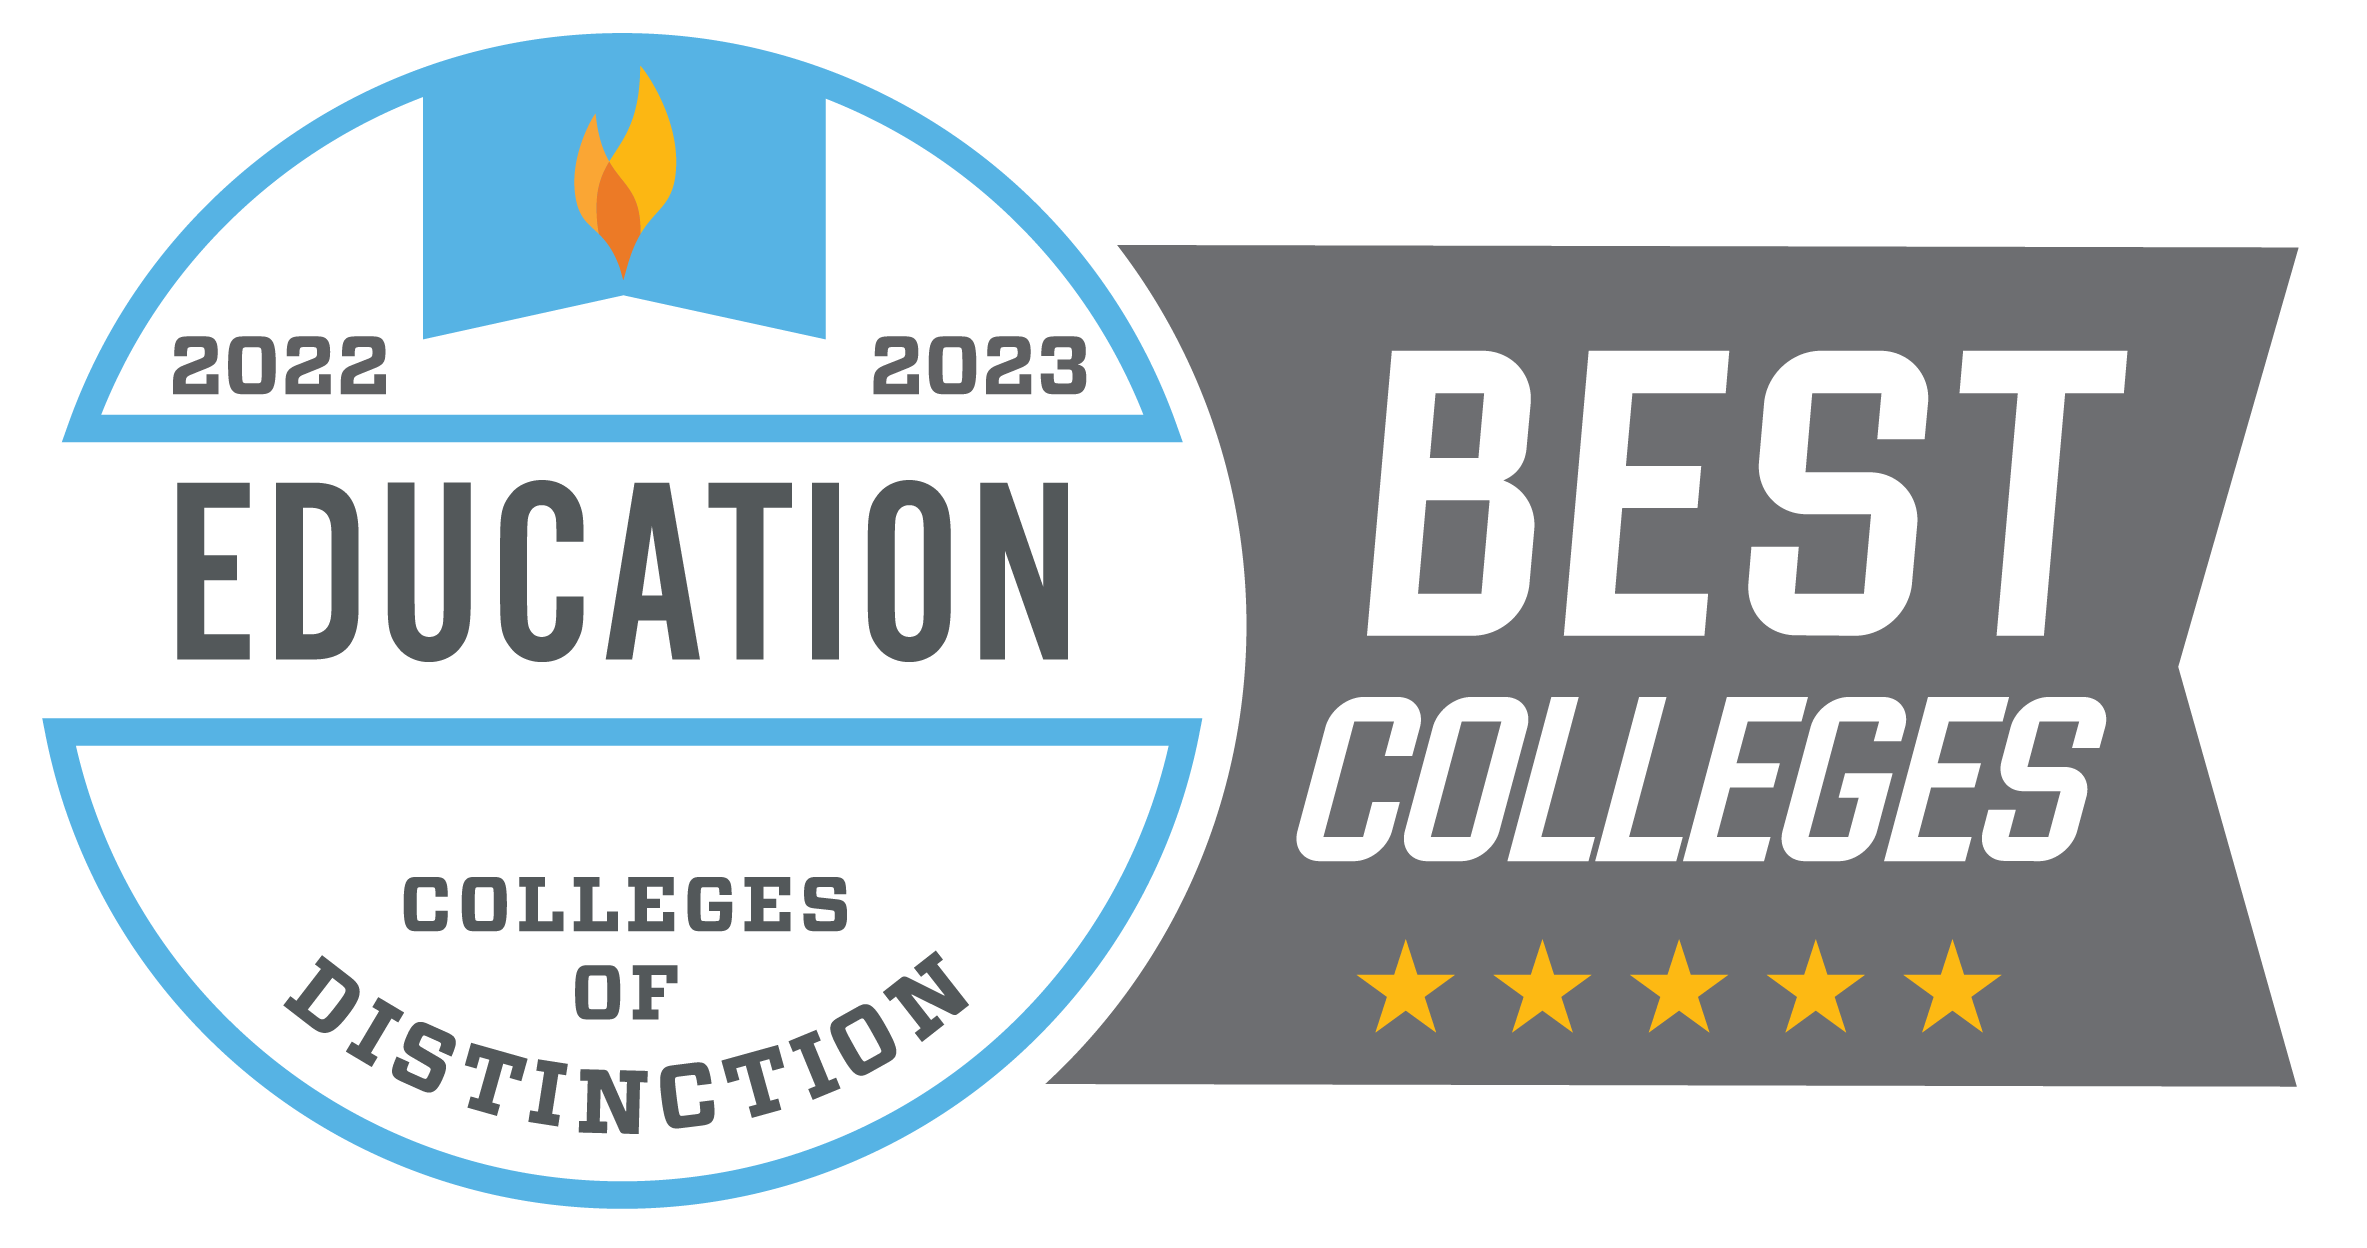 Education Colleges of Distinction badge